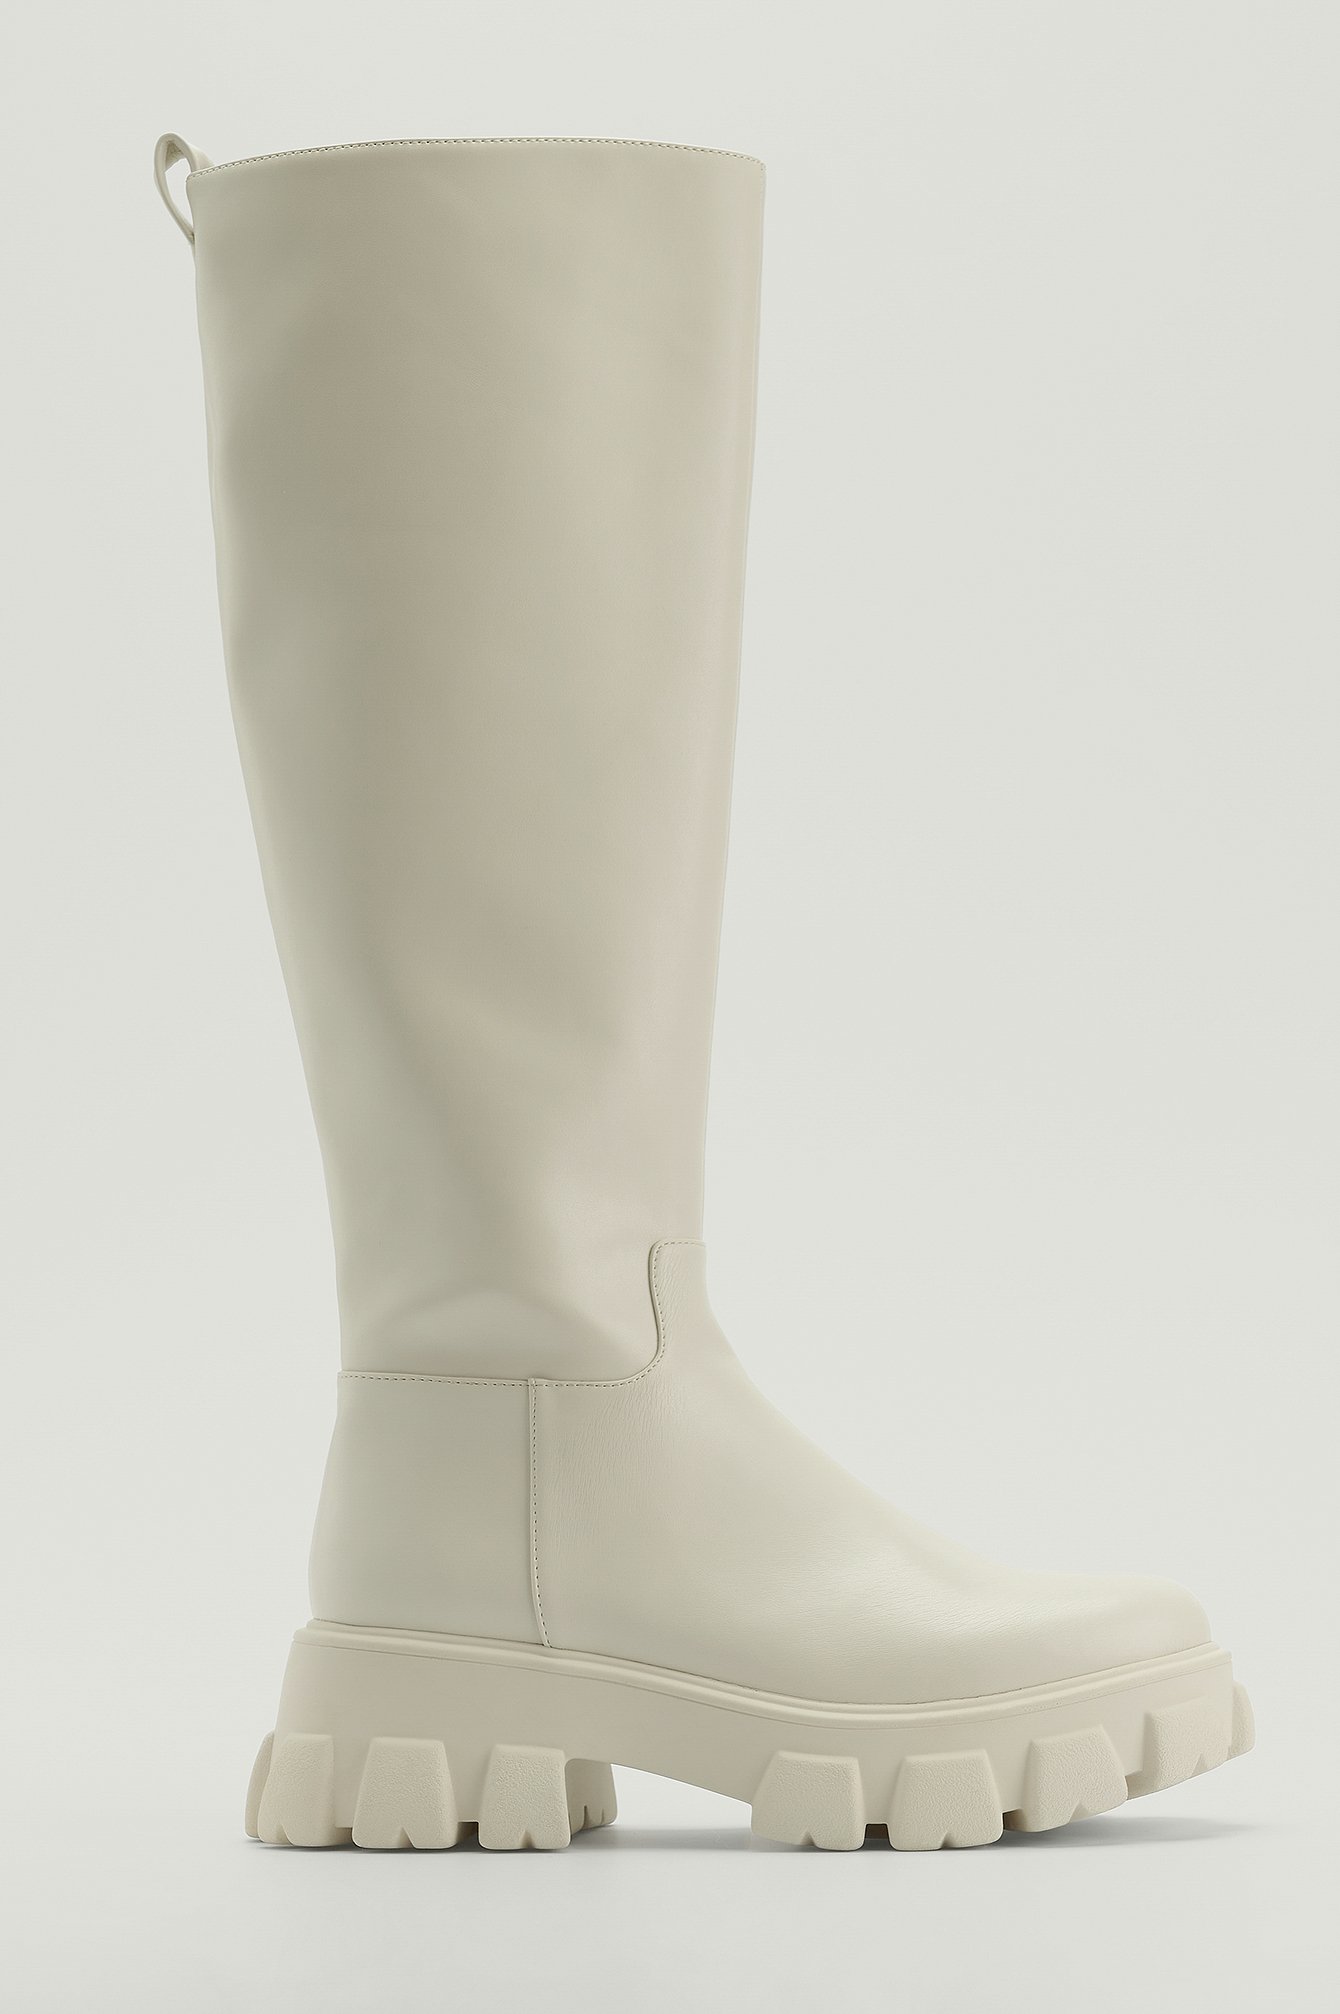 Offwhite Profile Sole Shaft Boots